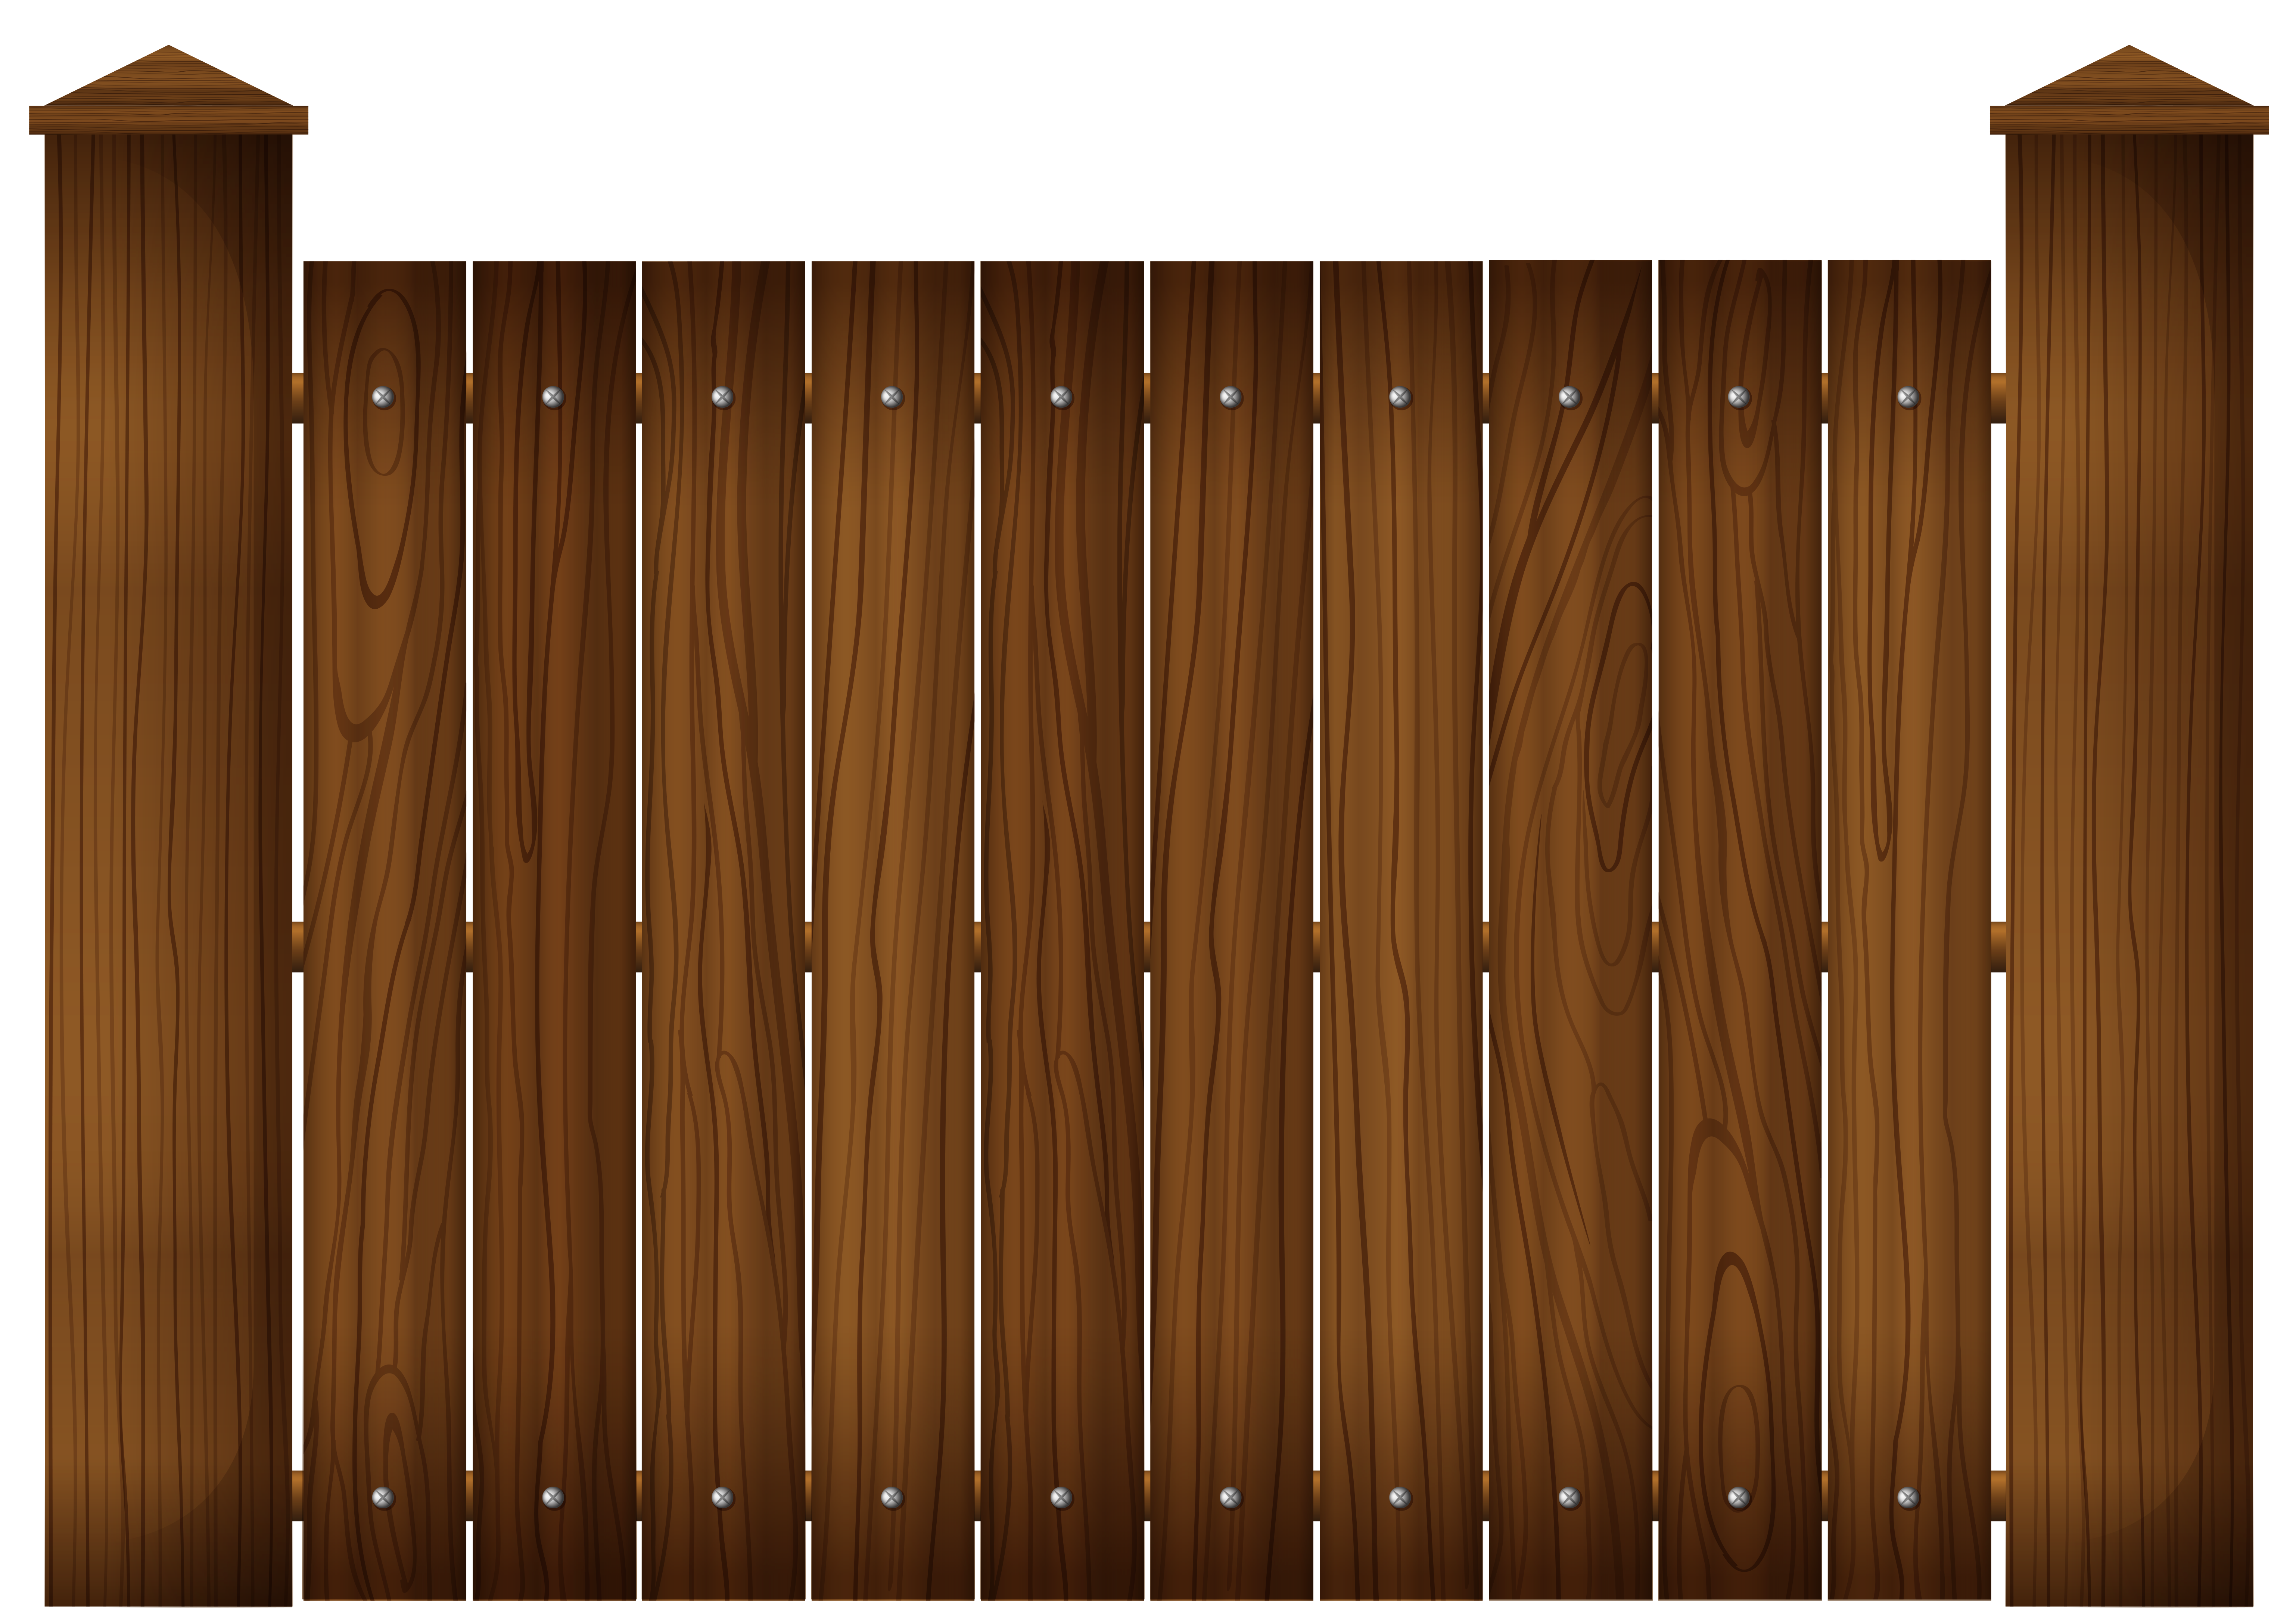 Fencing clipart wooden gate. Picket fence wood clip